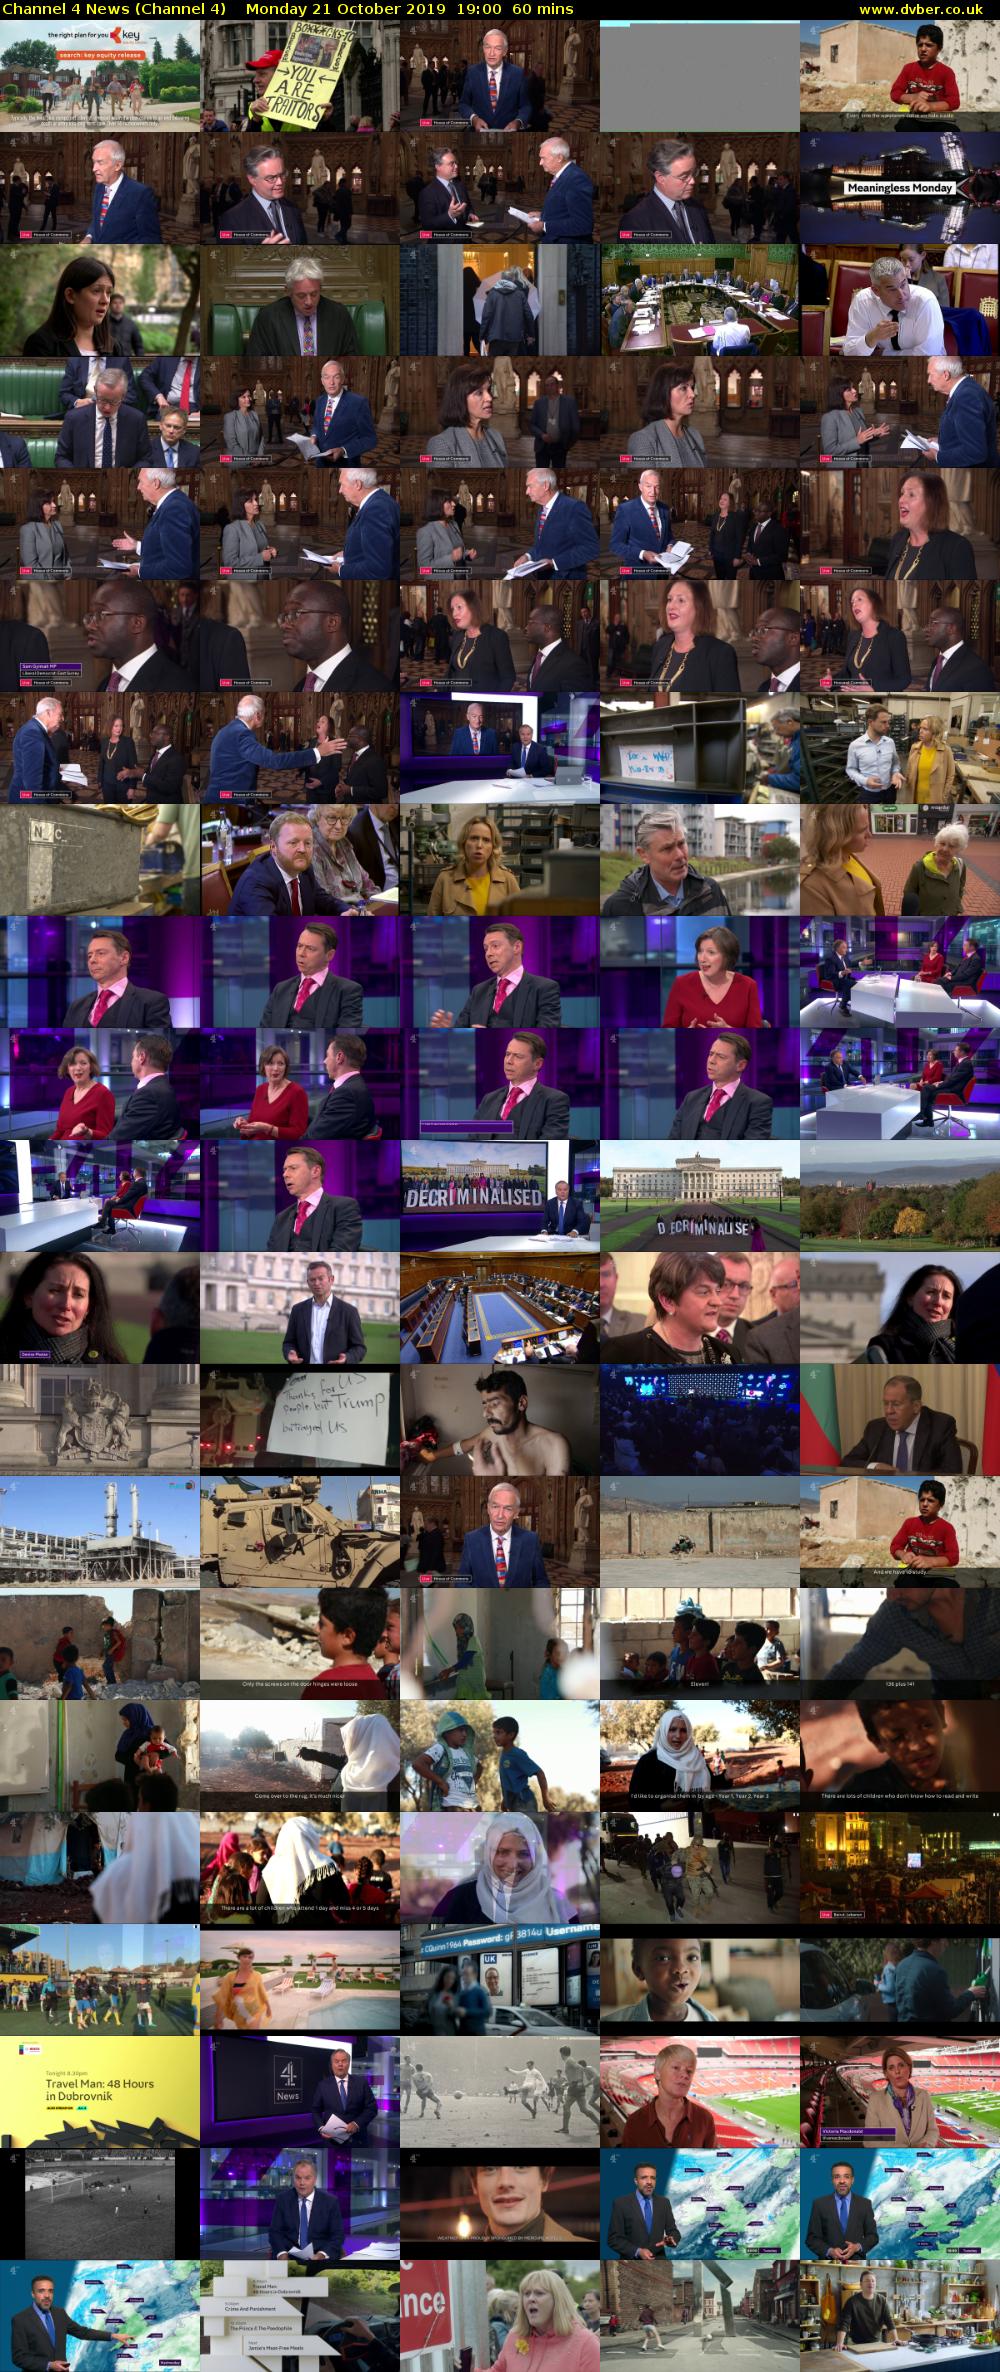 Channel 4 News (Channel 4) Monday 21 October 2019 19:00 - 20:00